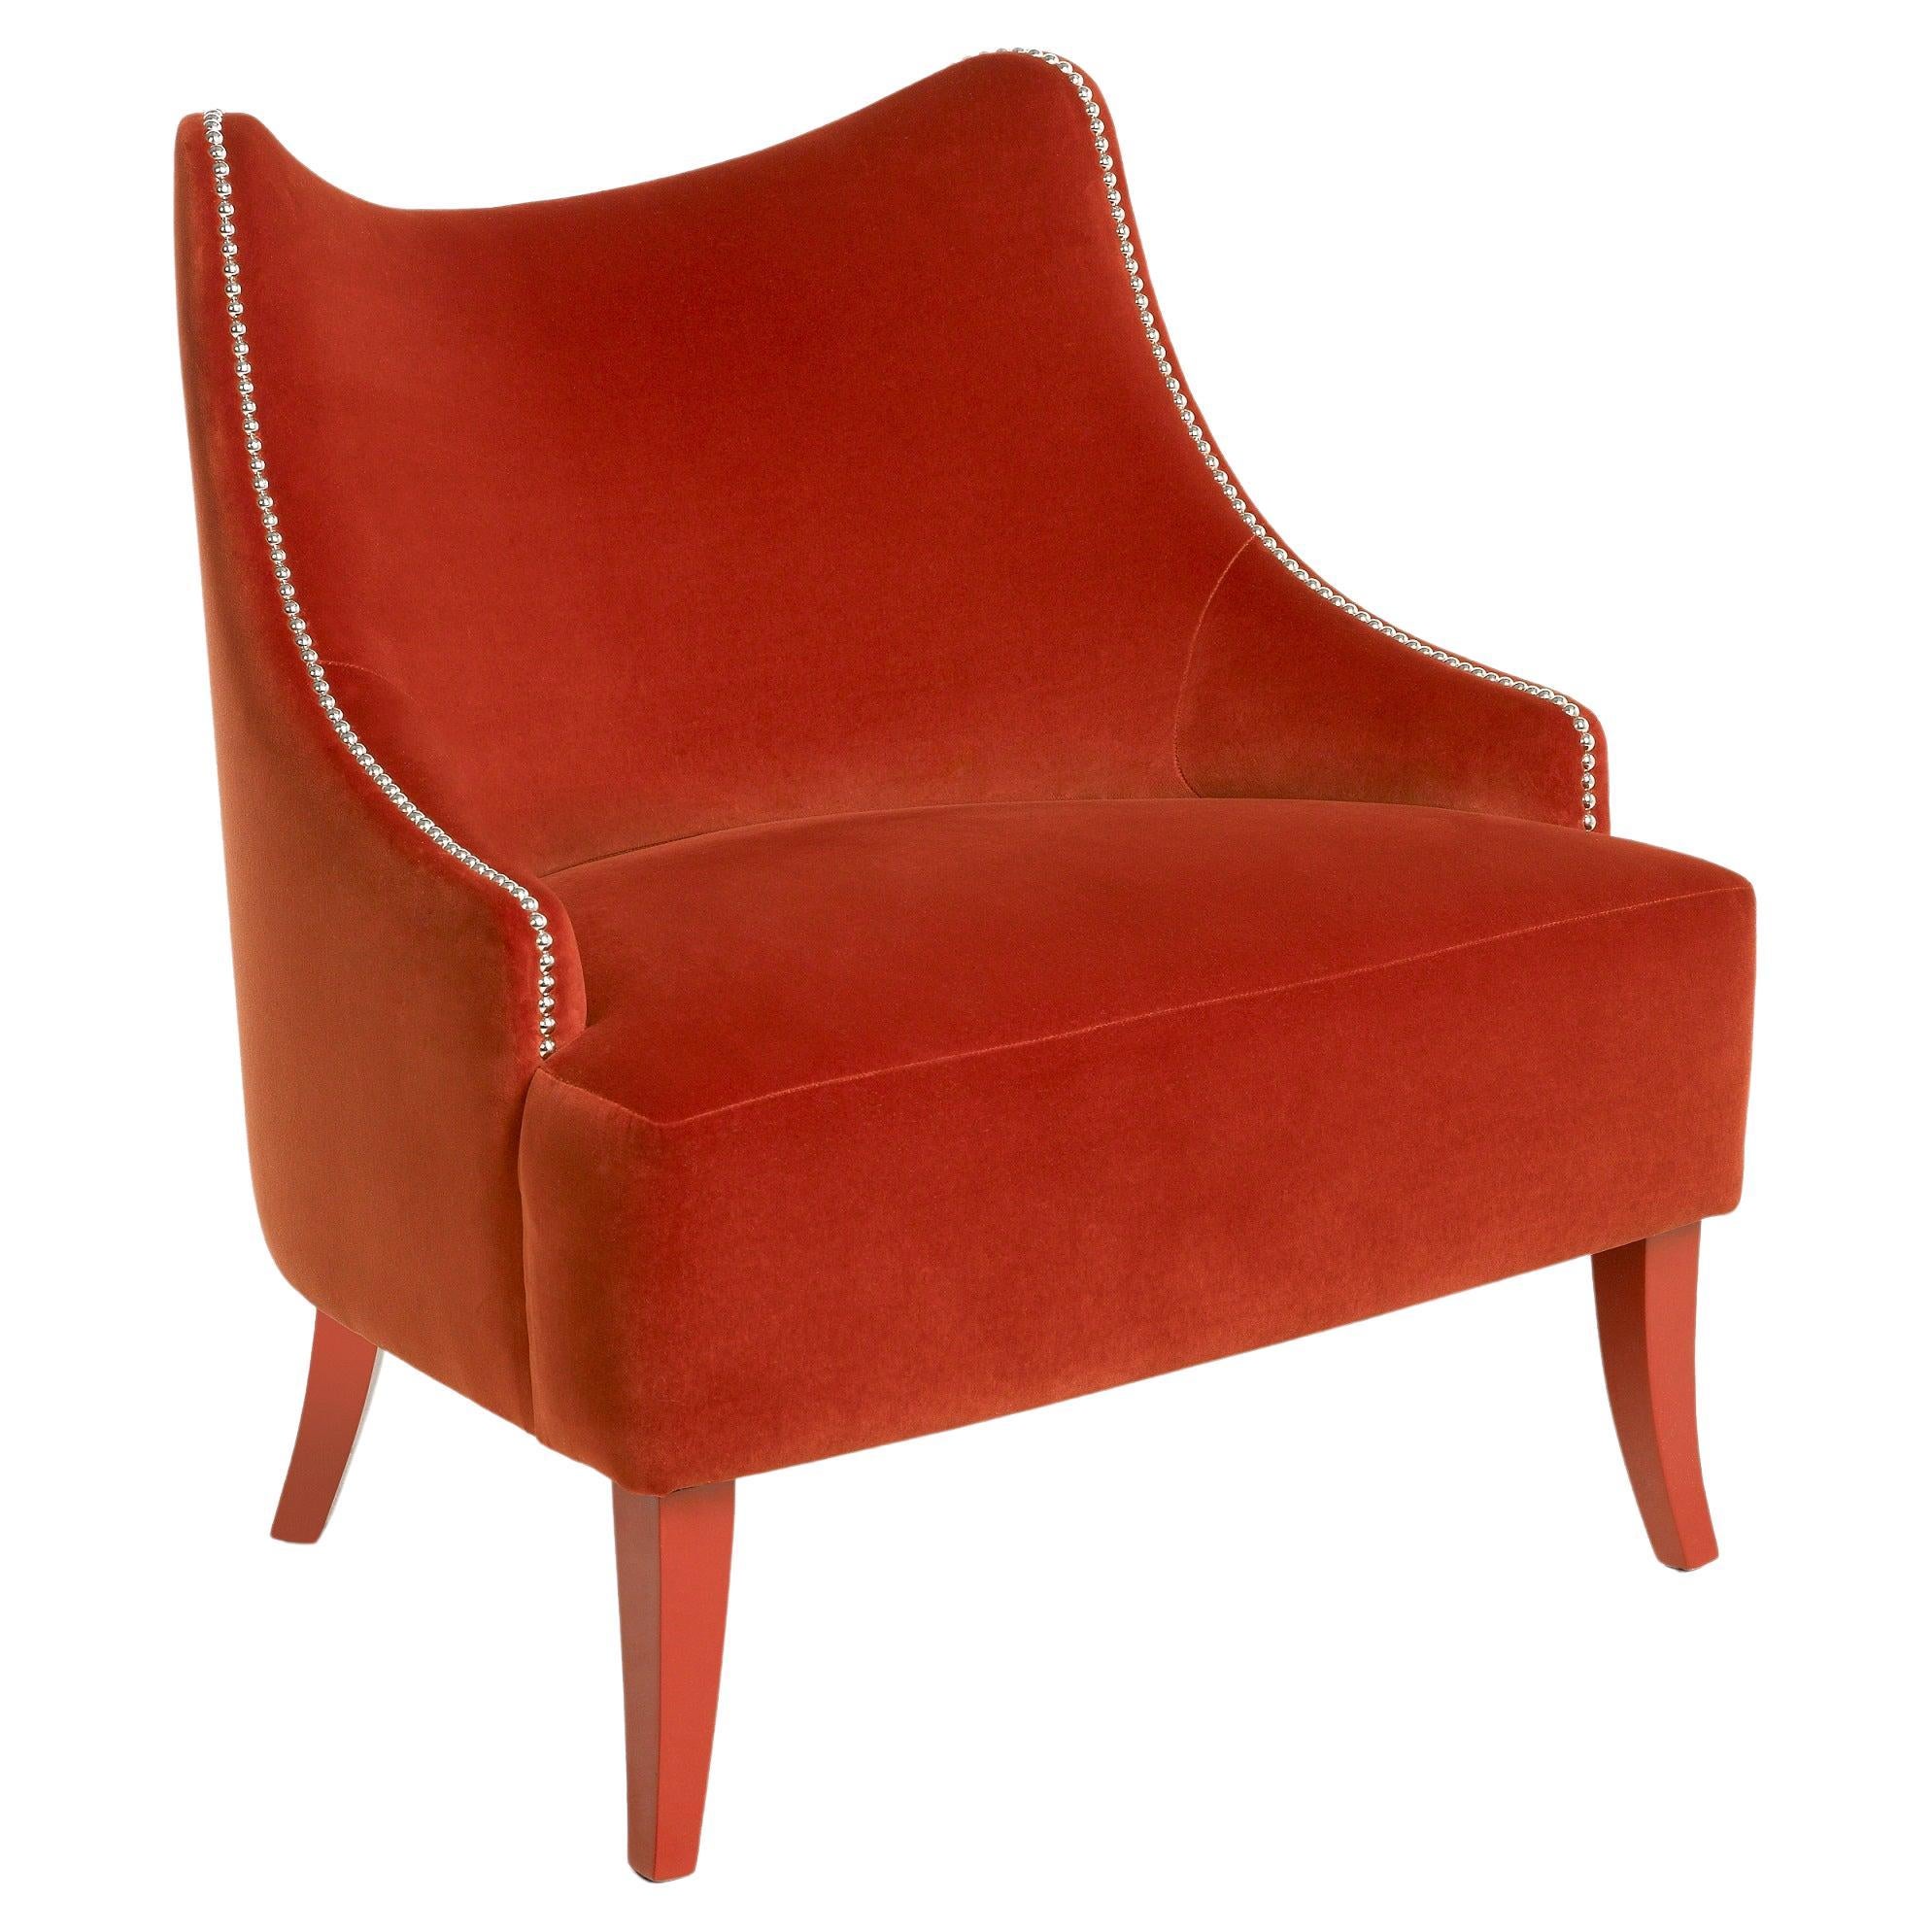 Contemporary Velvet Armchair Offered With Nails On The Curve & Back